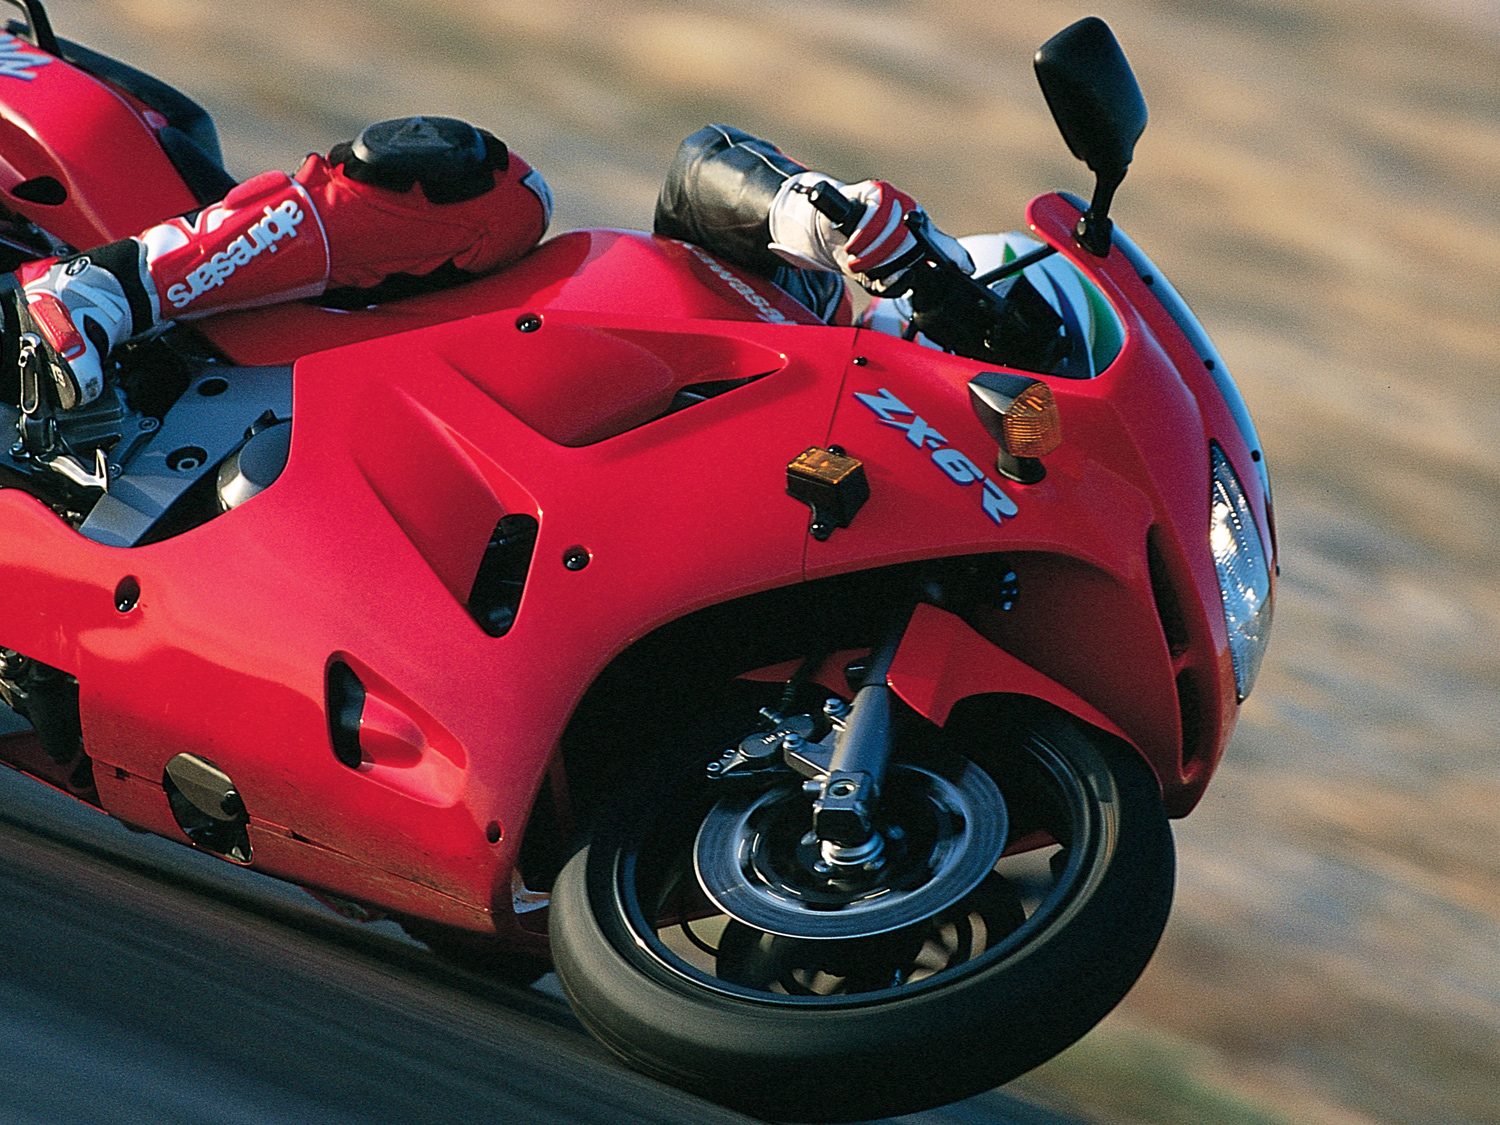 1996 Kawasaki ZX-6R Road Test—From The Archives | Cycle World